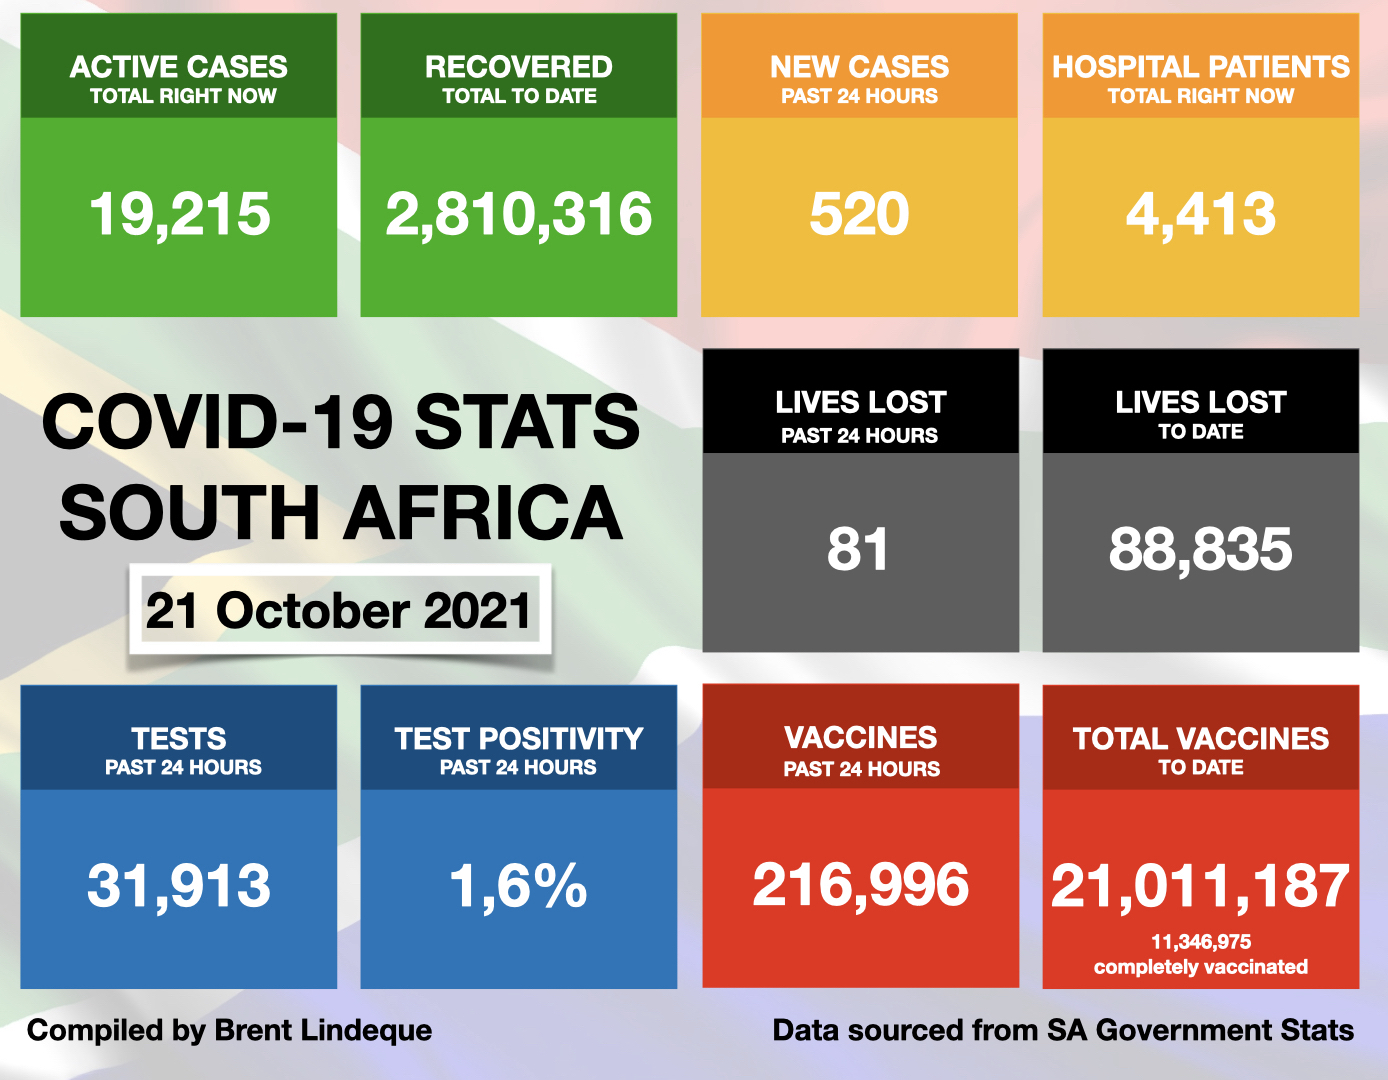 Latest South African COVID-19 Update (21 October 2021)